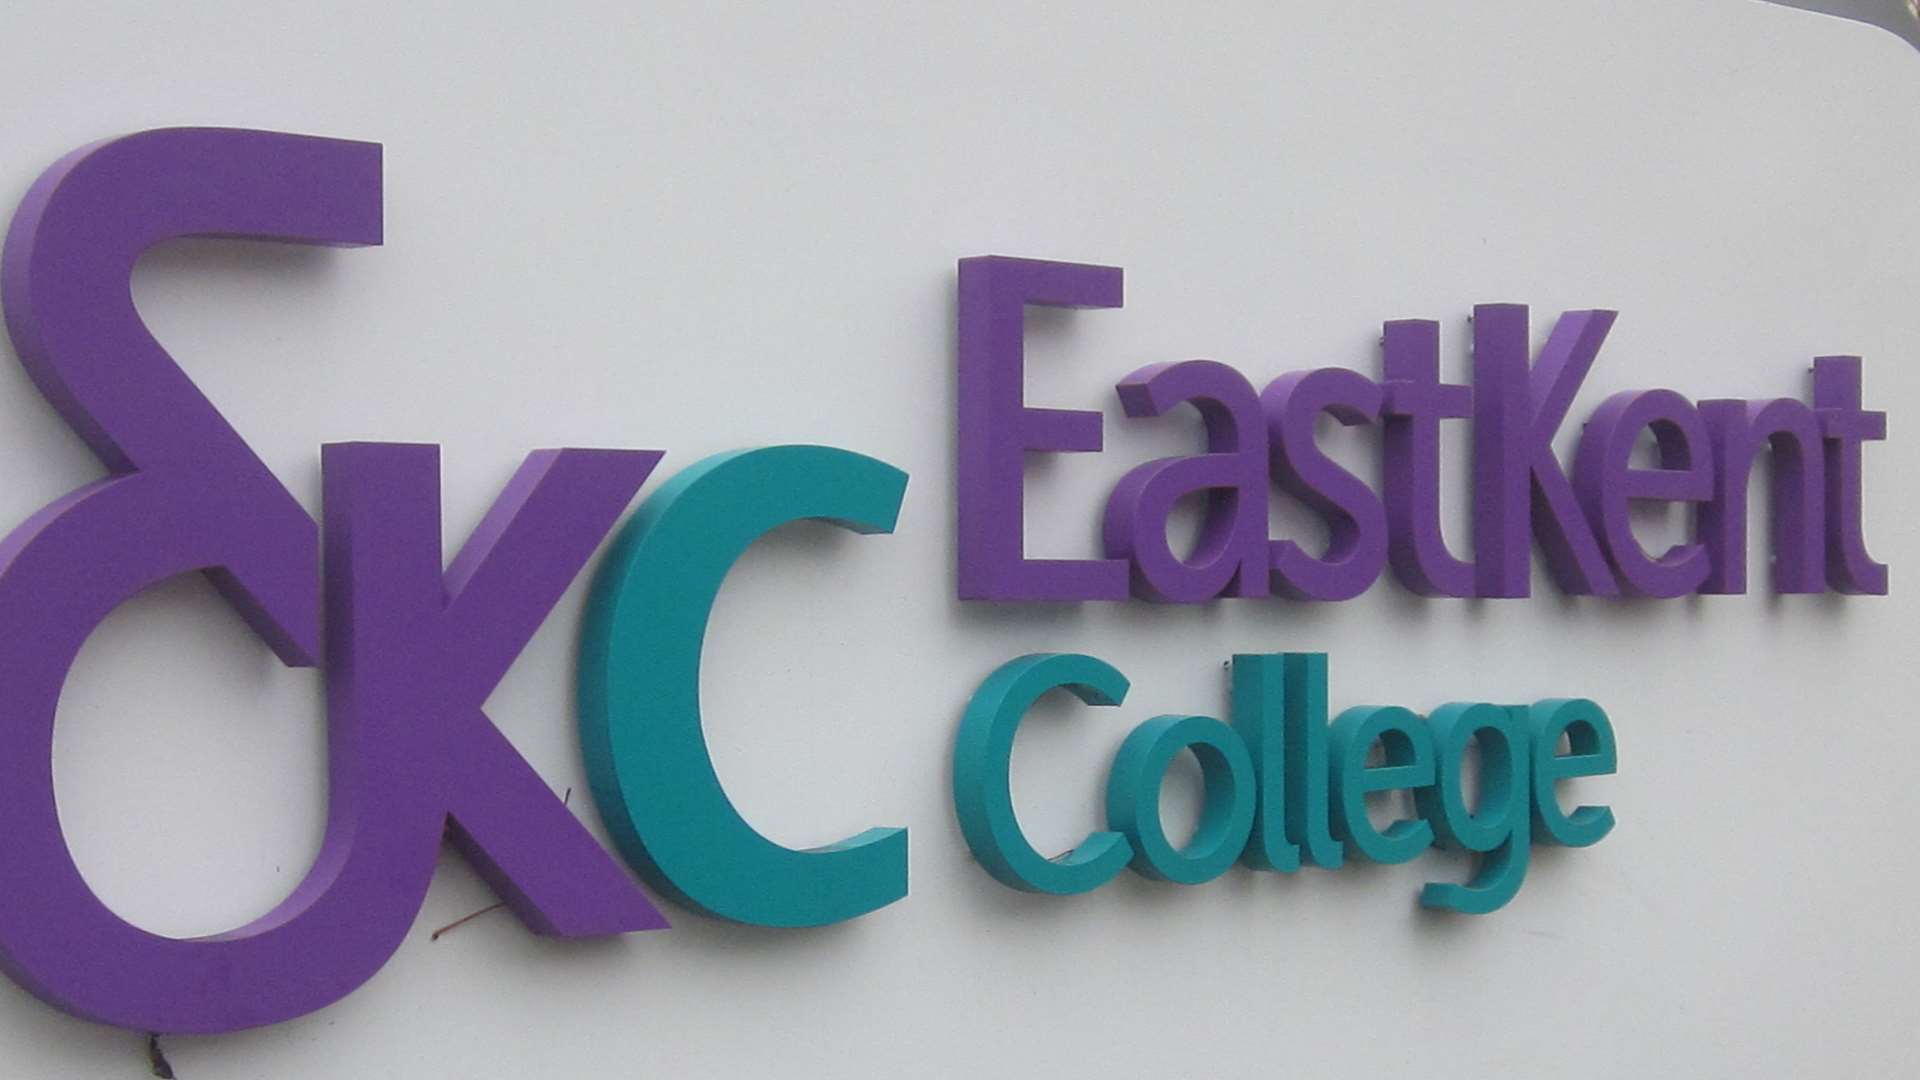 The East Kent College logo